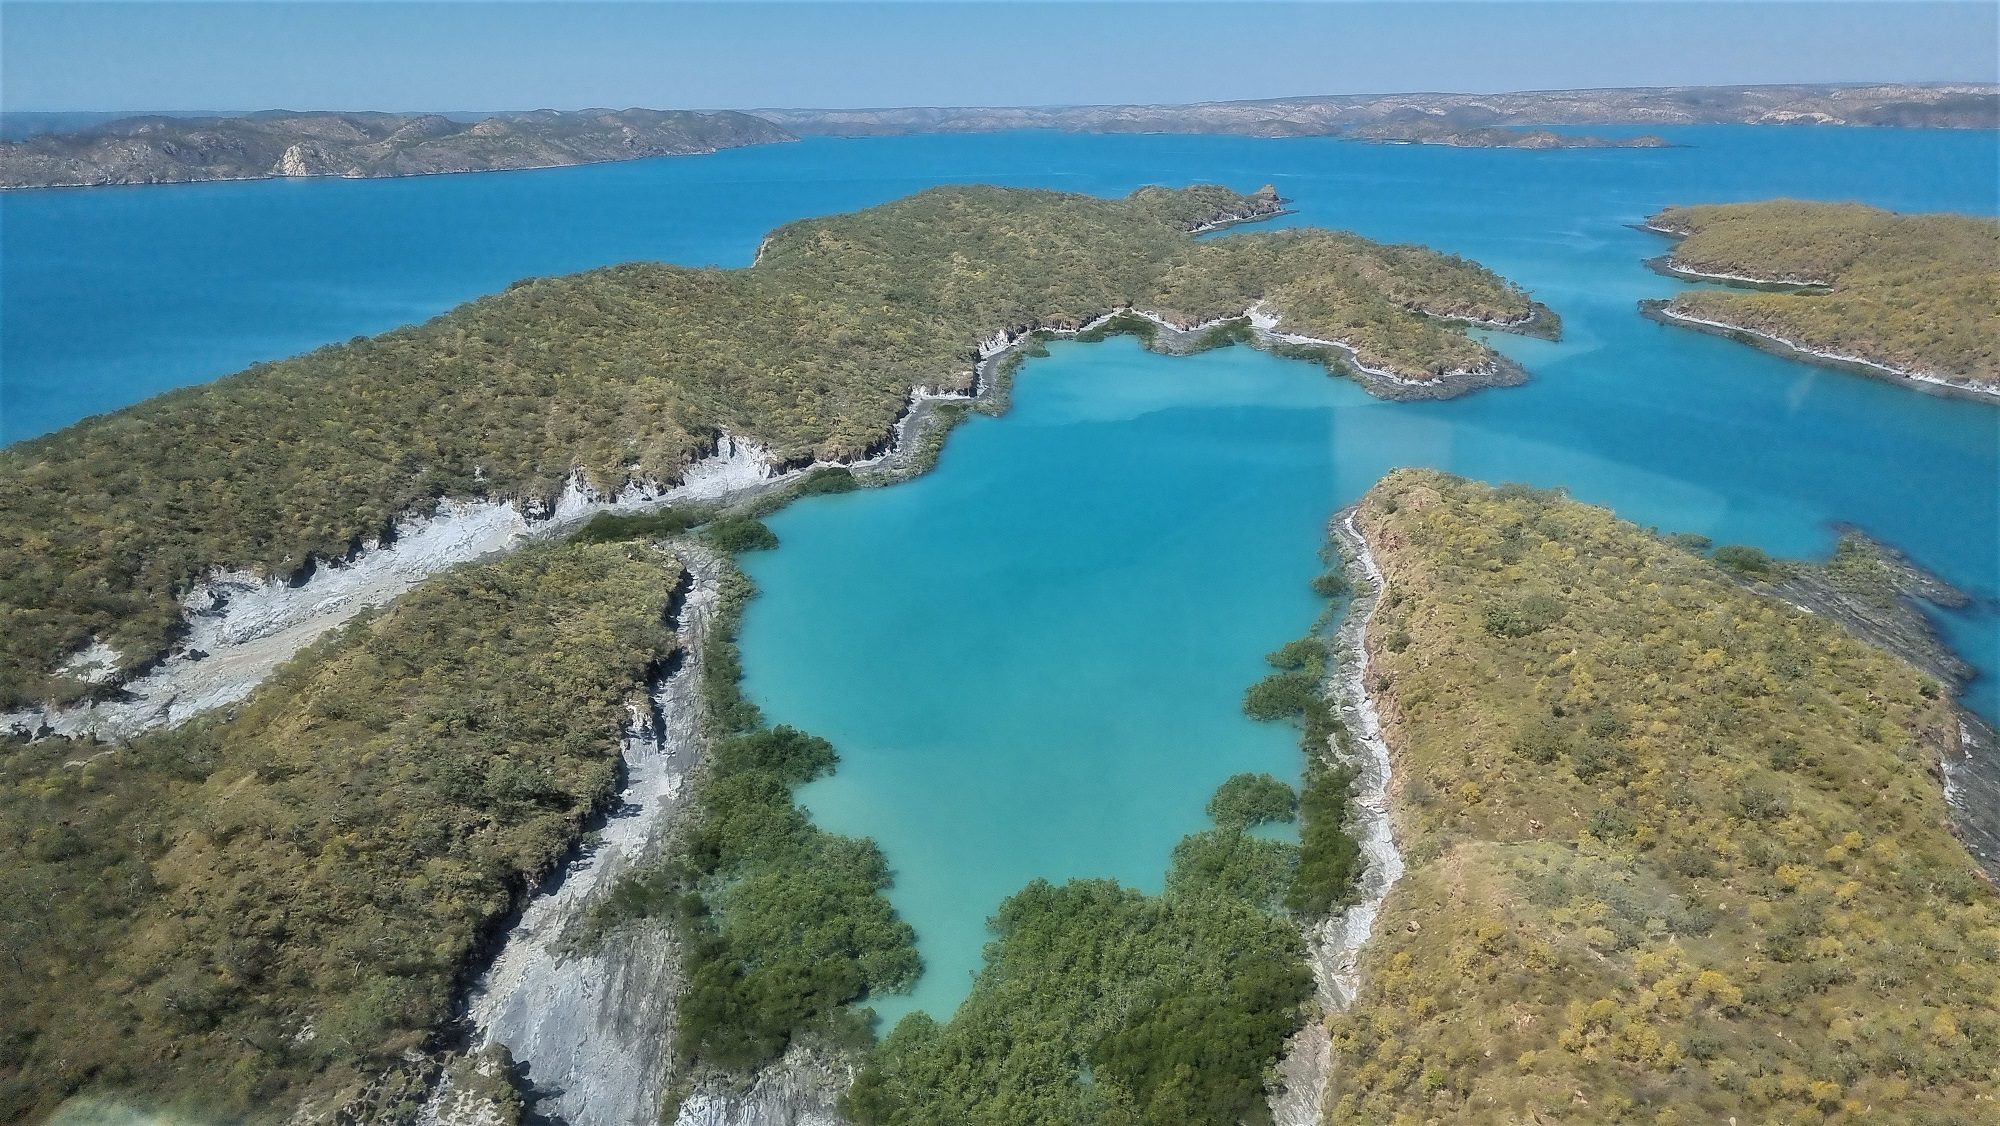 Broome horizontal Falls Day trip - blue turquoise water and green islands from our seaplane